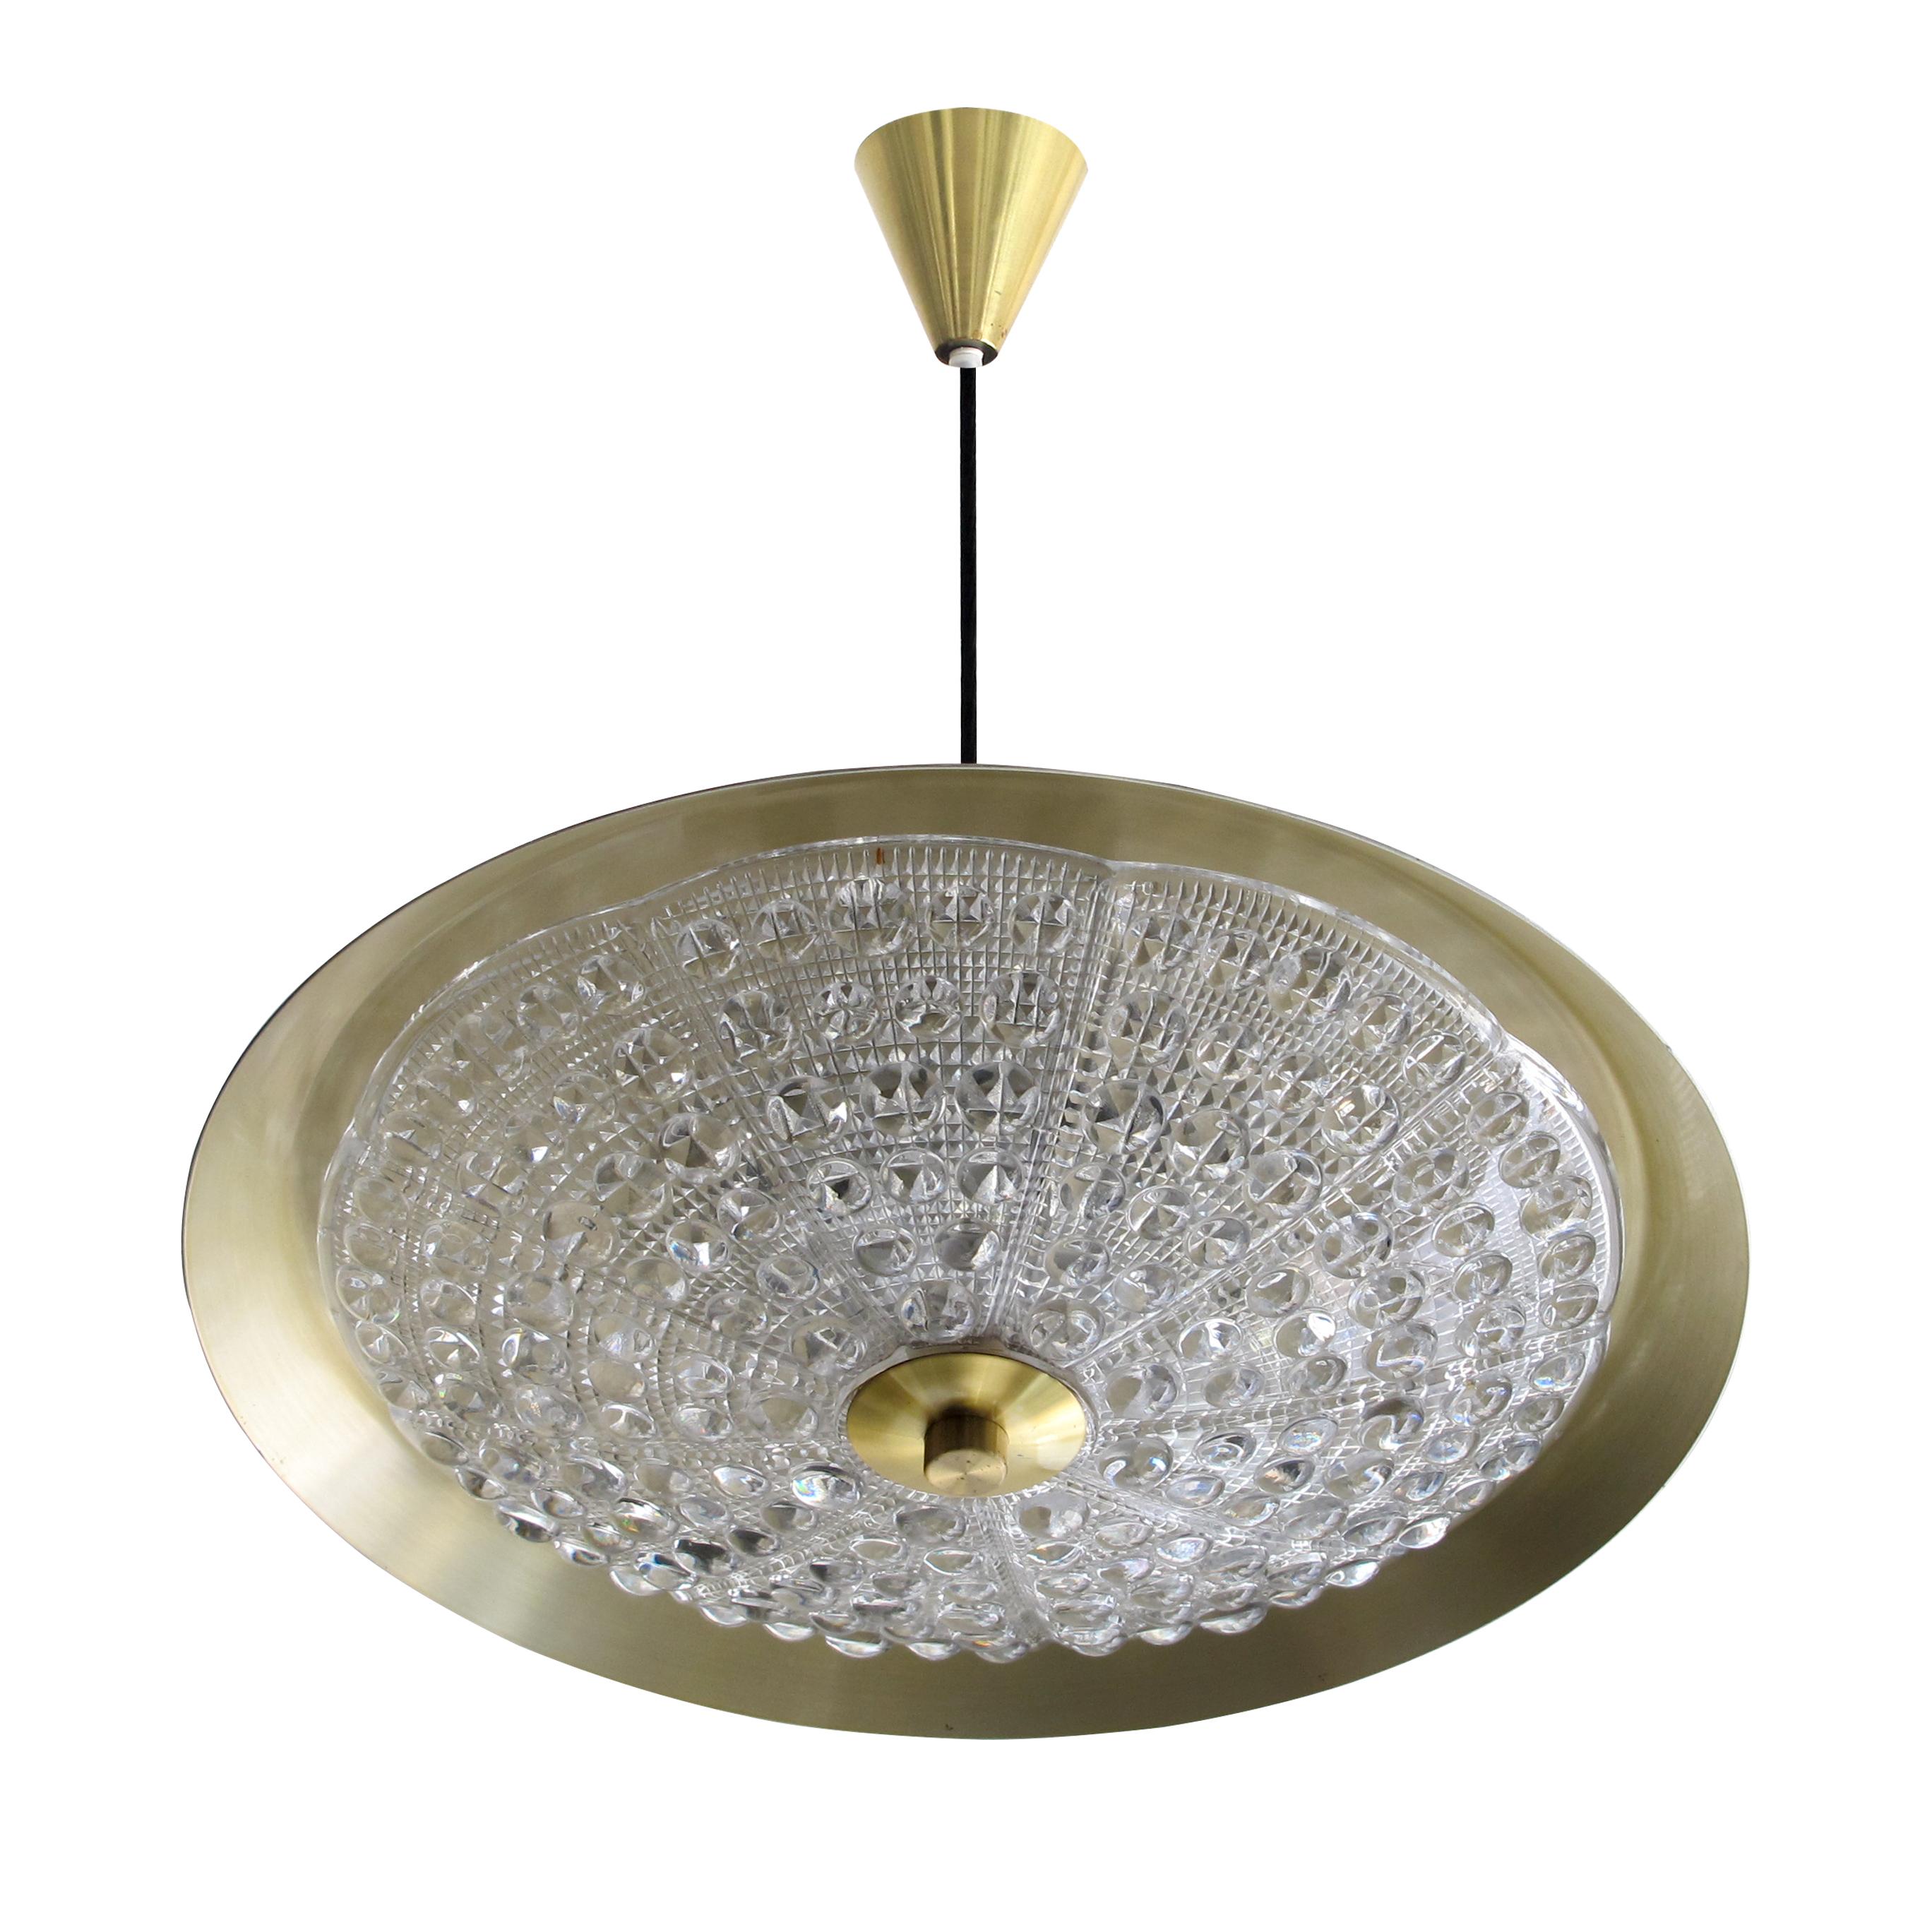 1960’s brass circular ceiling light with beautifully detailed moulded glass. This is a simple, yet elegant timeless design, very well made and in great condition. The ceiling lamp is wired to the European standard. 

Light fittings: 6x Small screw